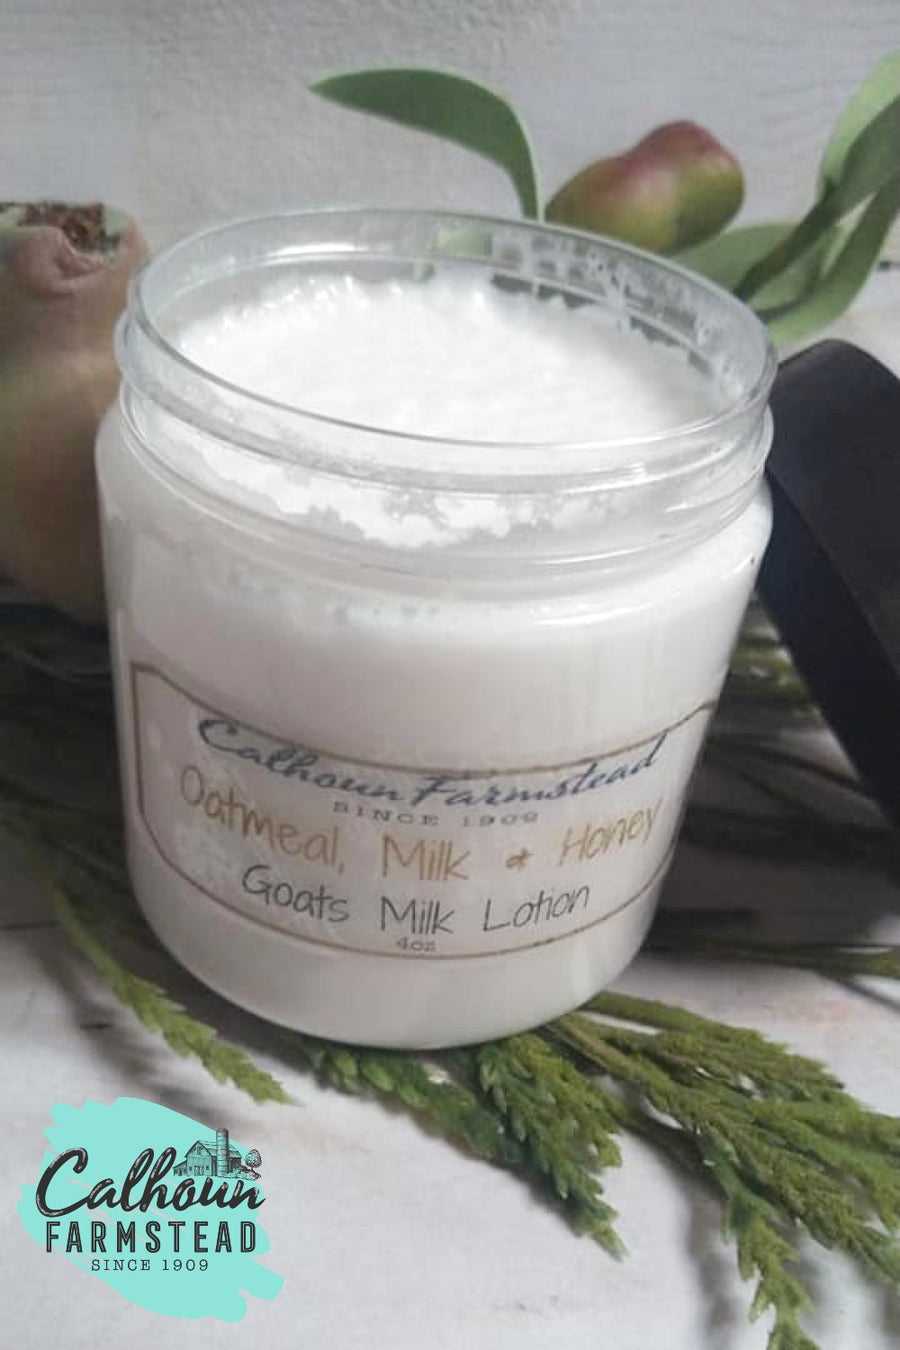 oatmeal goats milk lotions for sensitive skin types.